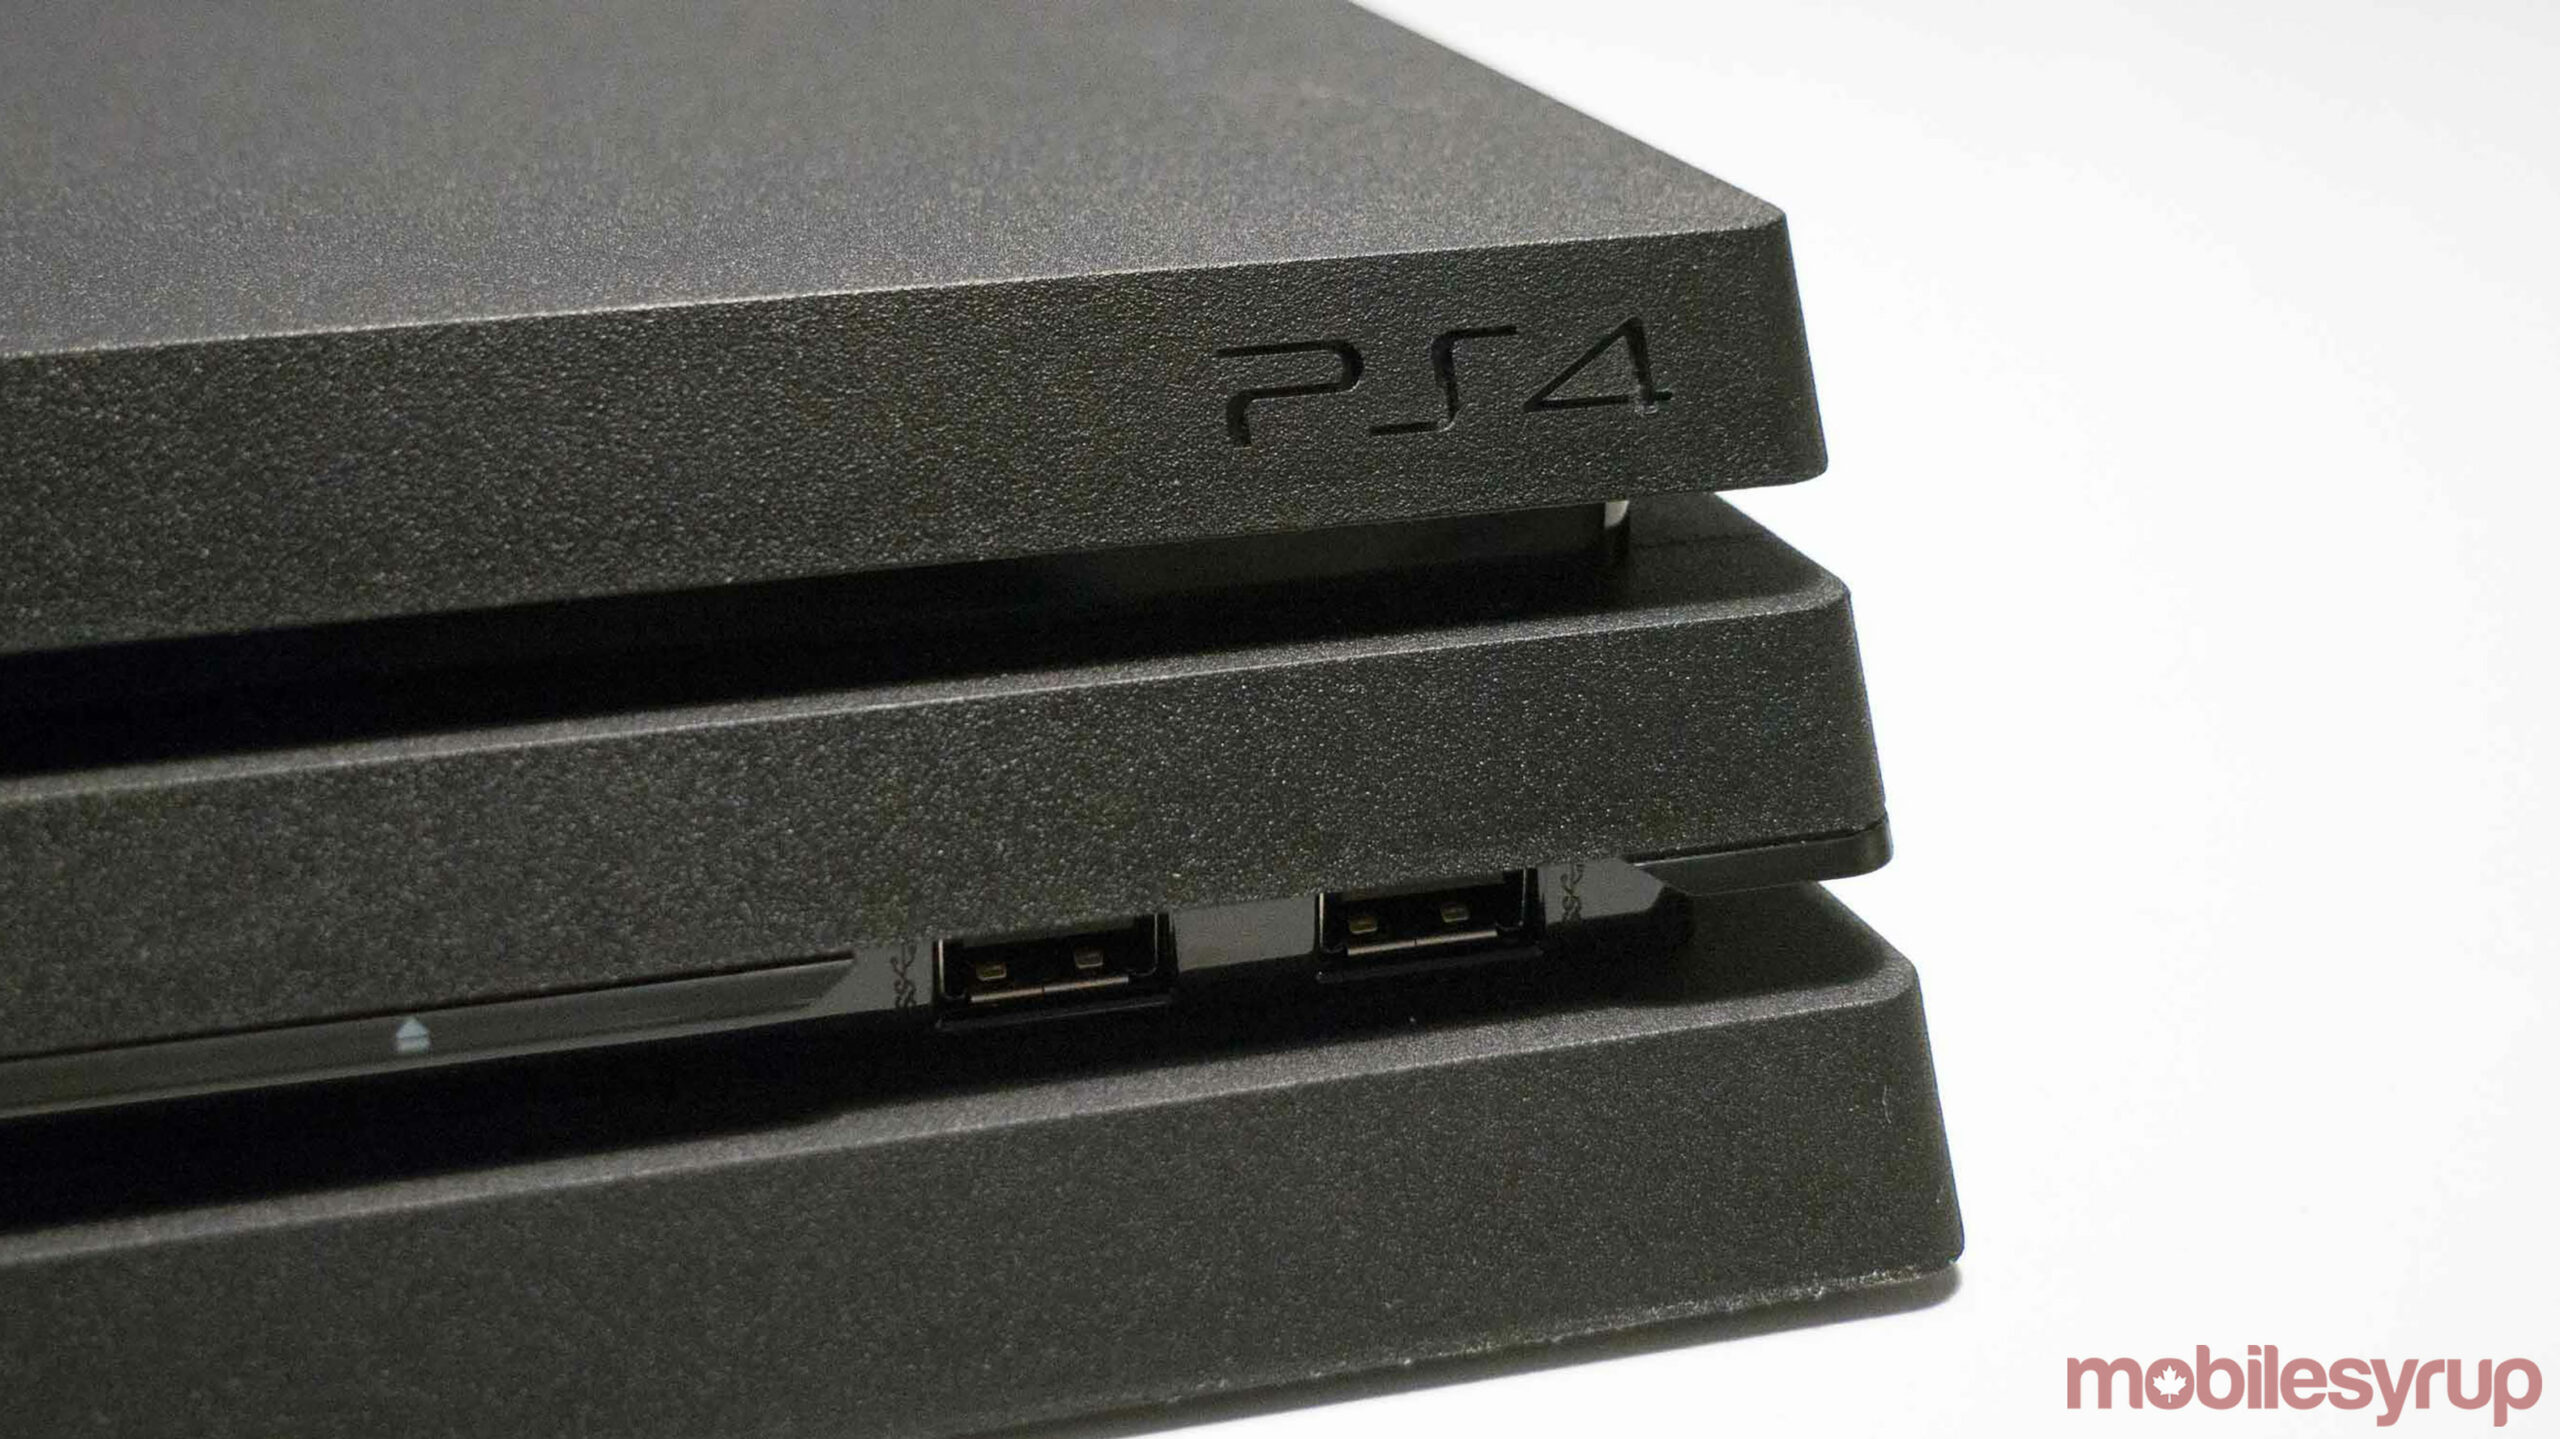 ps4 system